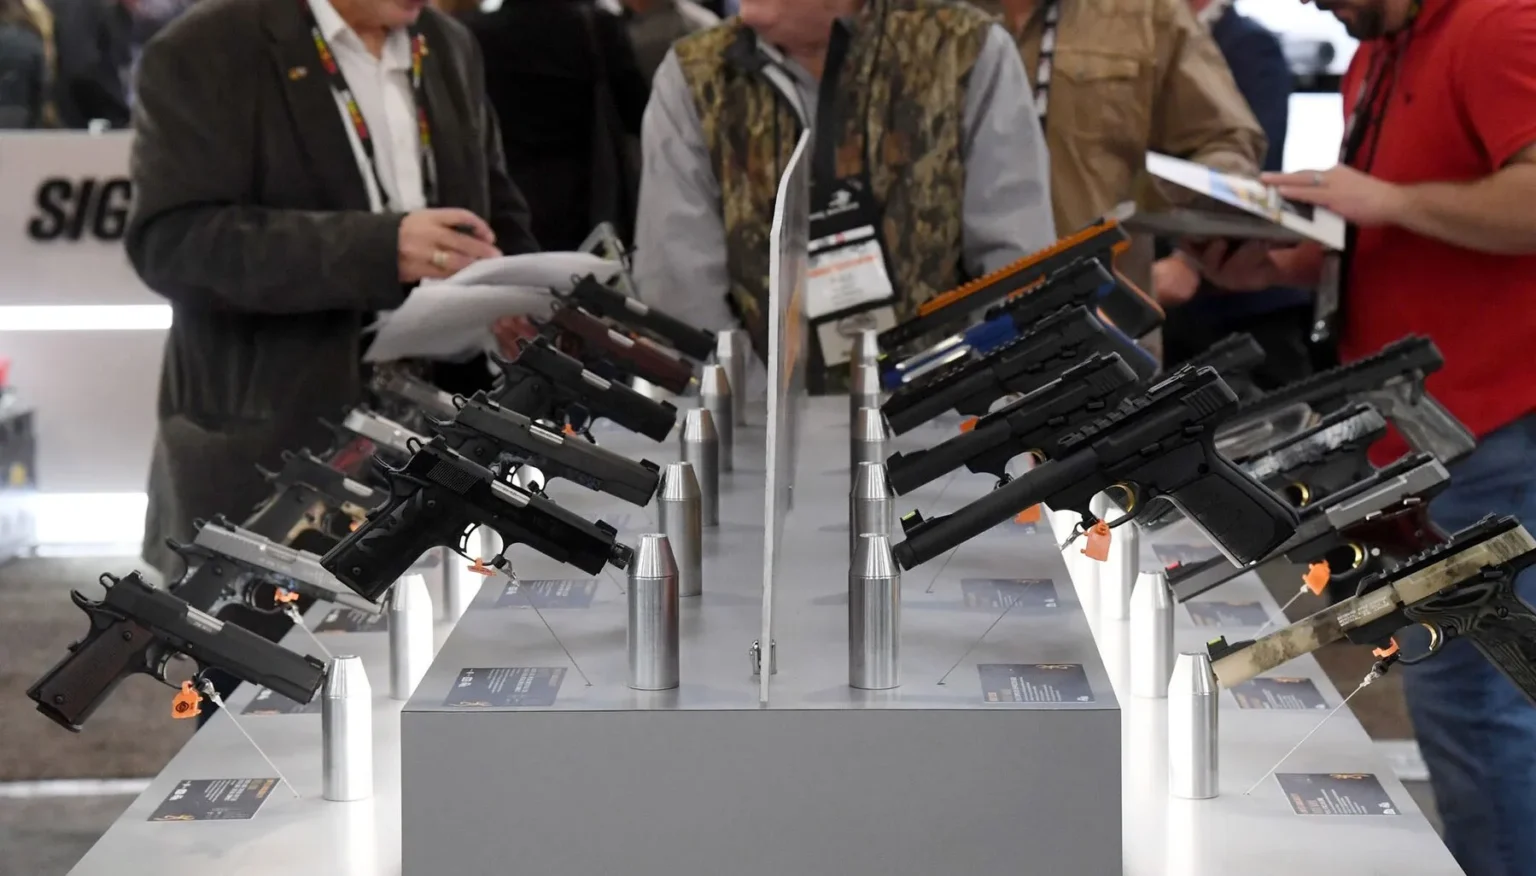 us-plans-to-impose-new-restrictions-on-firearms-exports-official